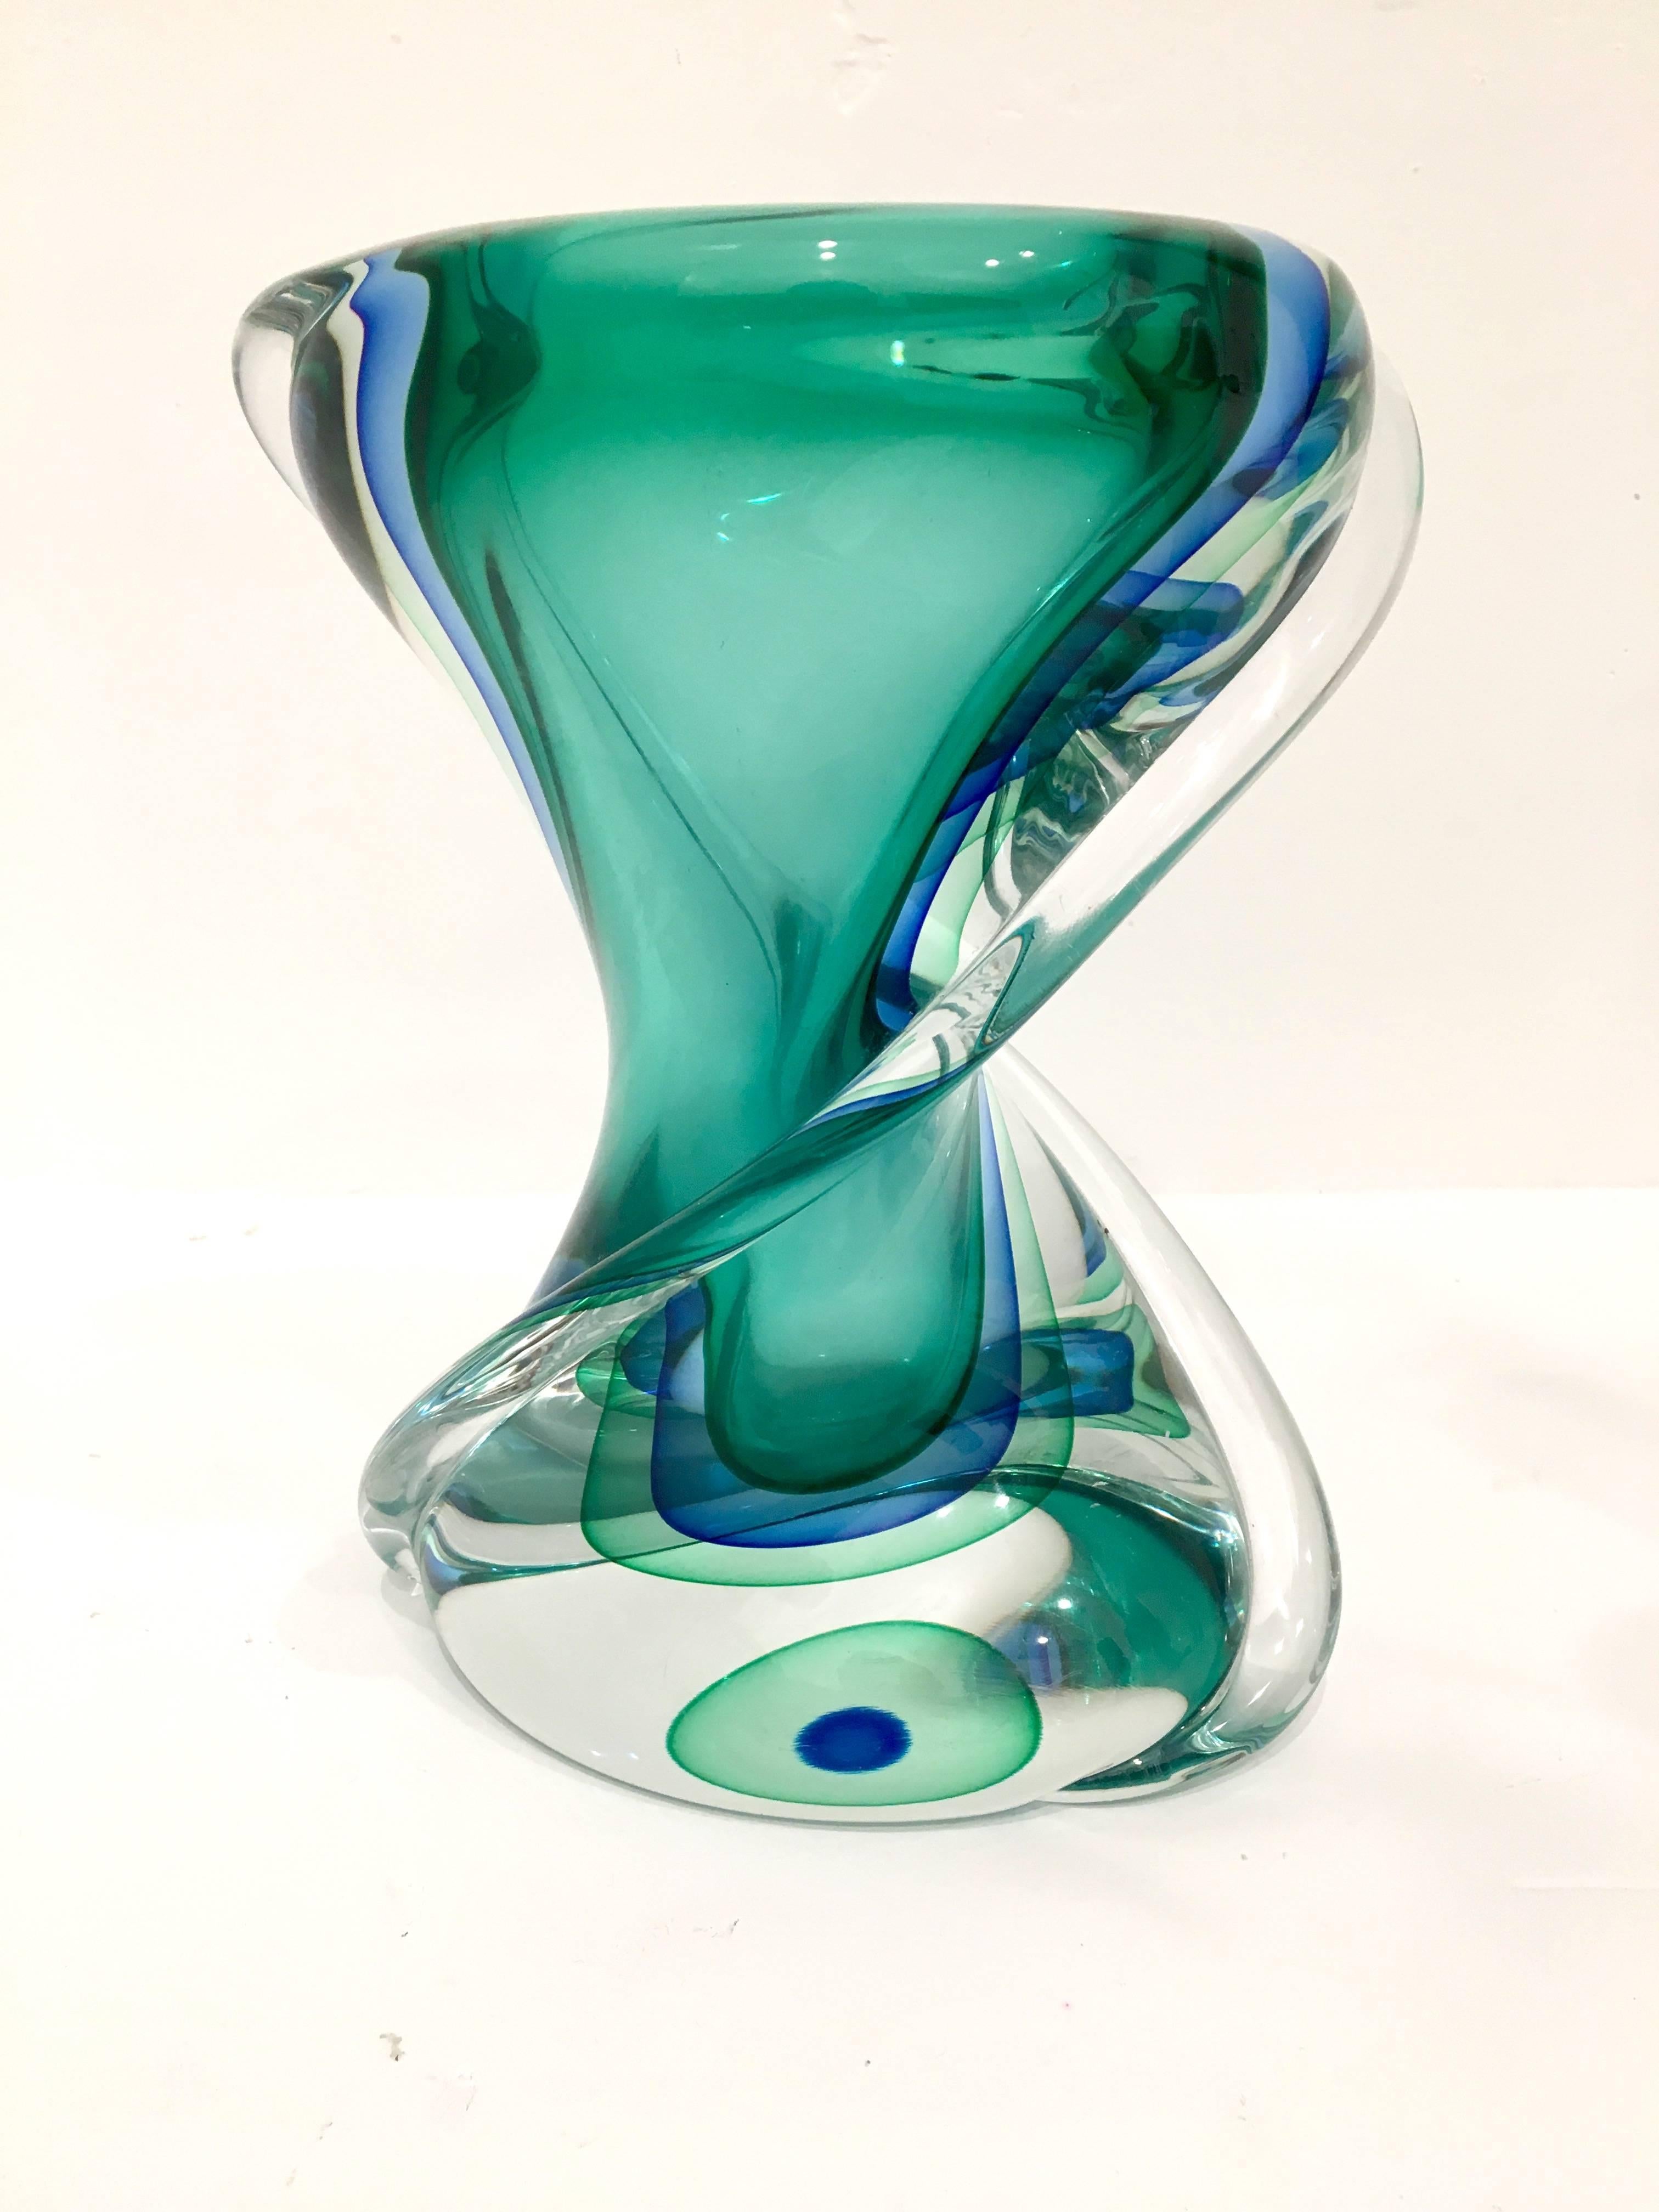 Beautiful and rare vase by Luciano Gaspari for Seguso, Murano, Sommerso organic glass vase. Vibrant colors on this incredible piece.